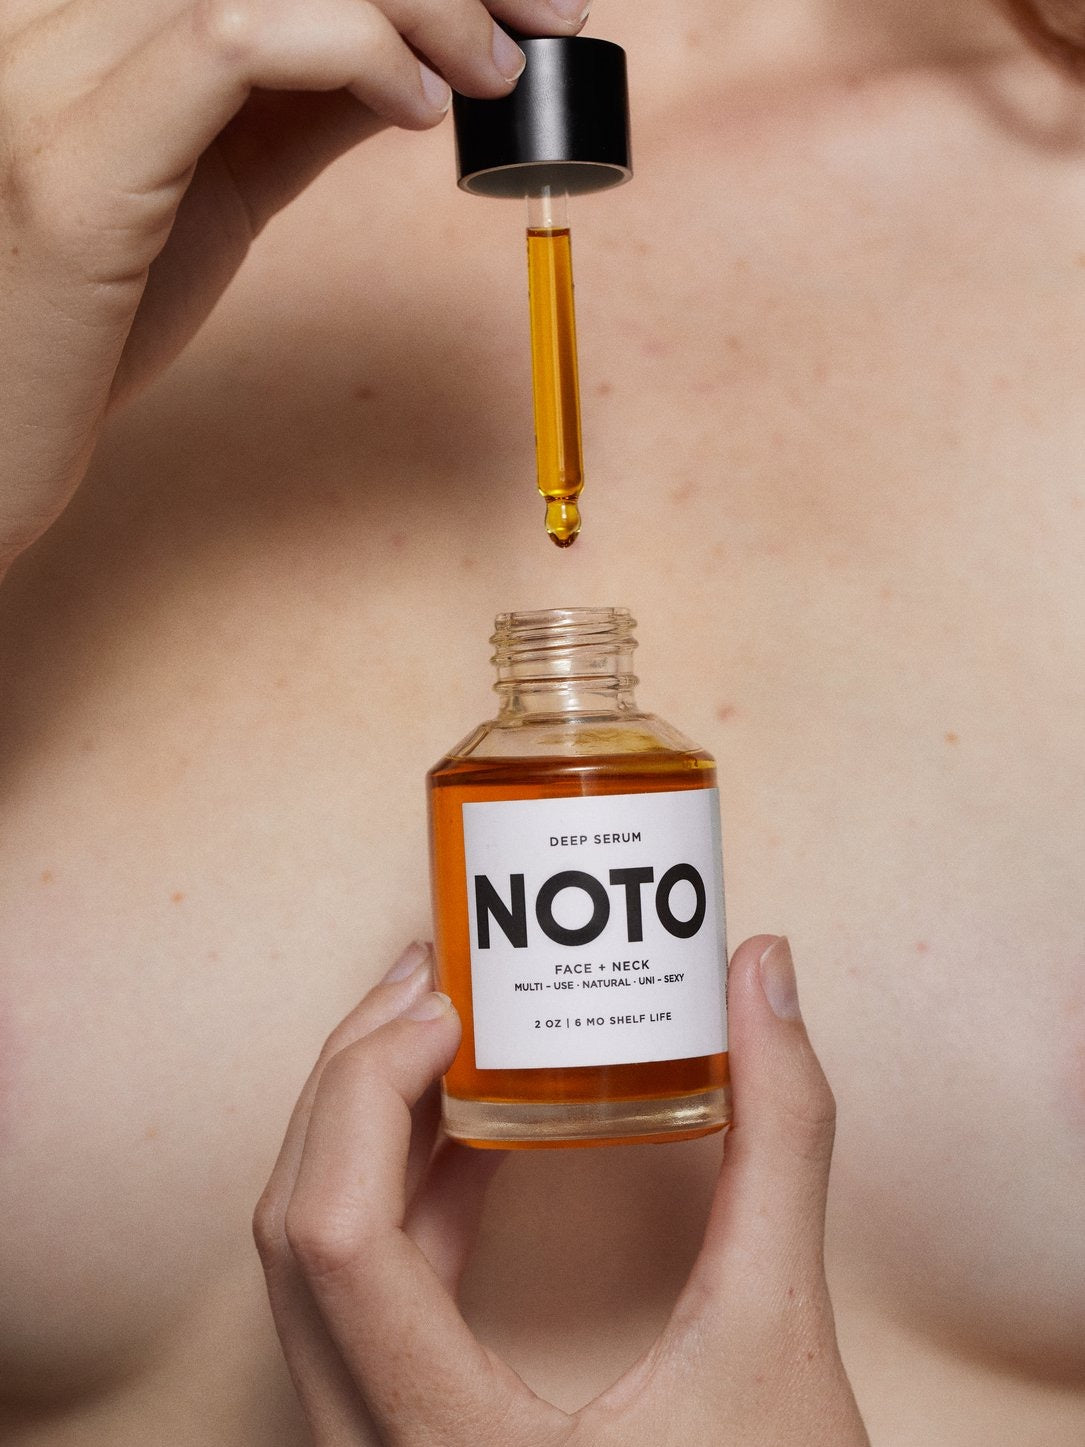 A woman holding a bottle of Mini Deep Serum by NOTO on her breast.